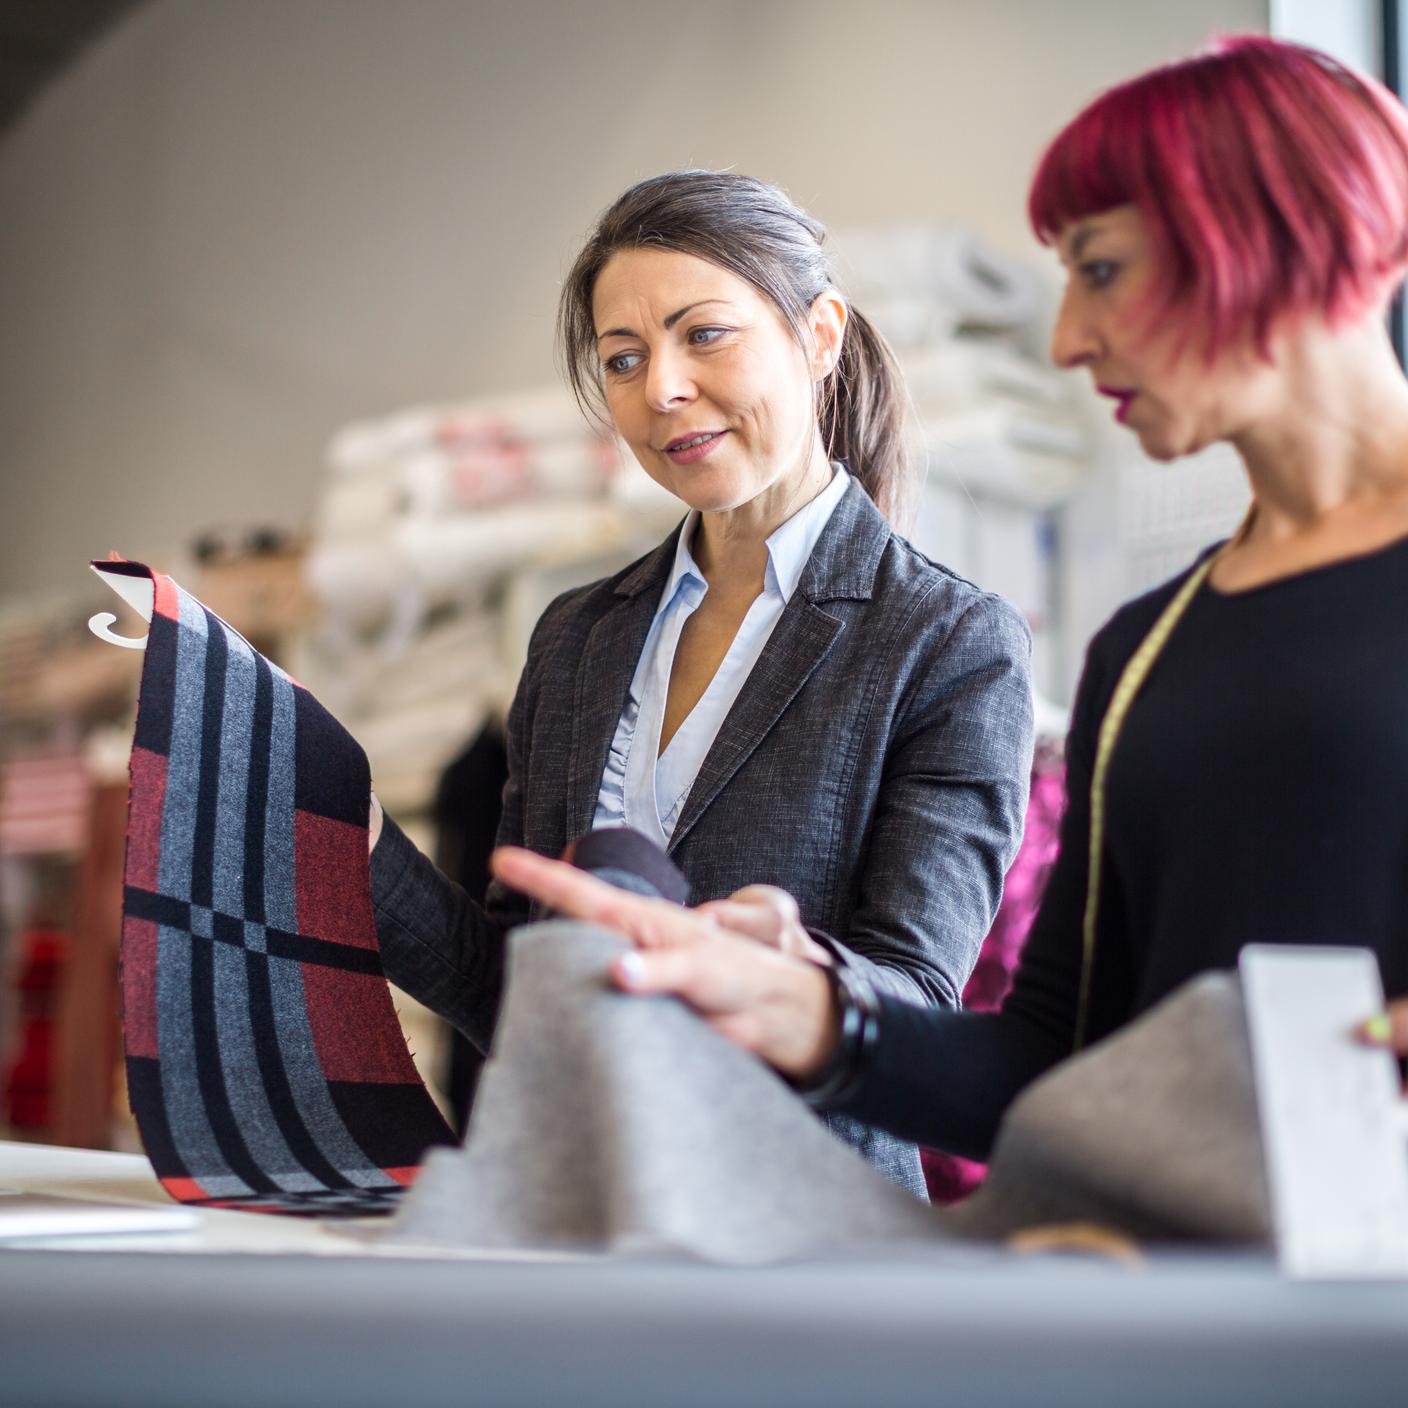 Instilling confidence in domestic furniture and quality fabric with BSI Kitemark™ - Two women checking fabrics